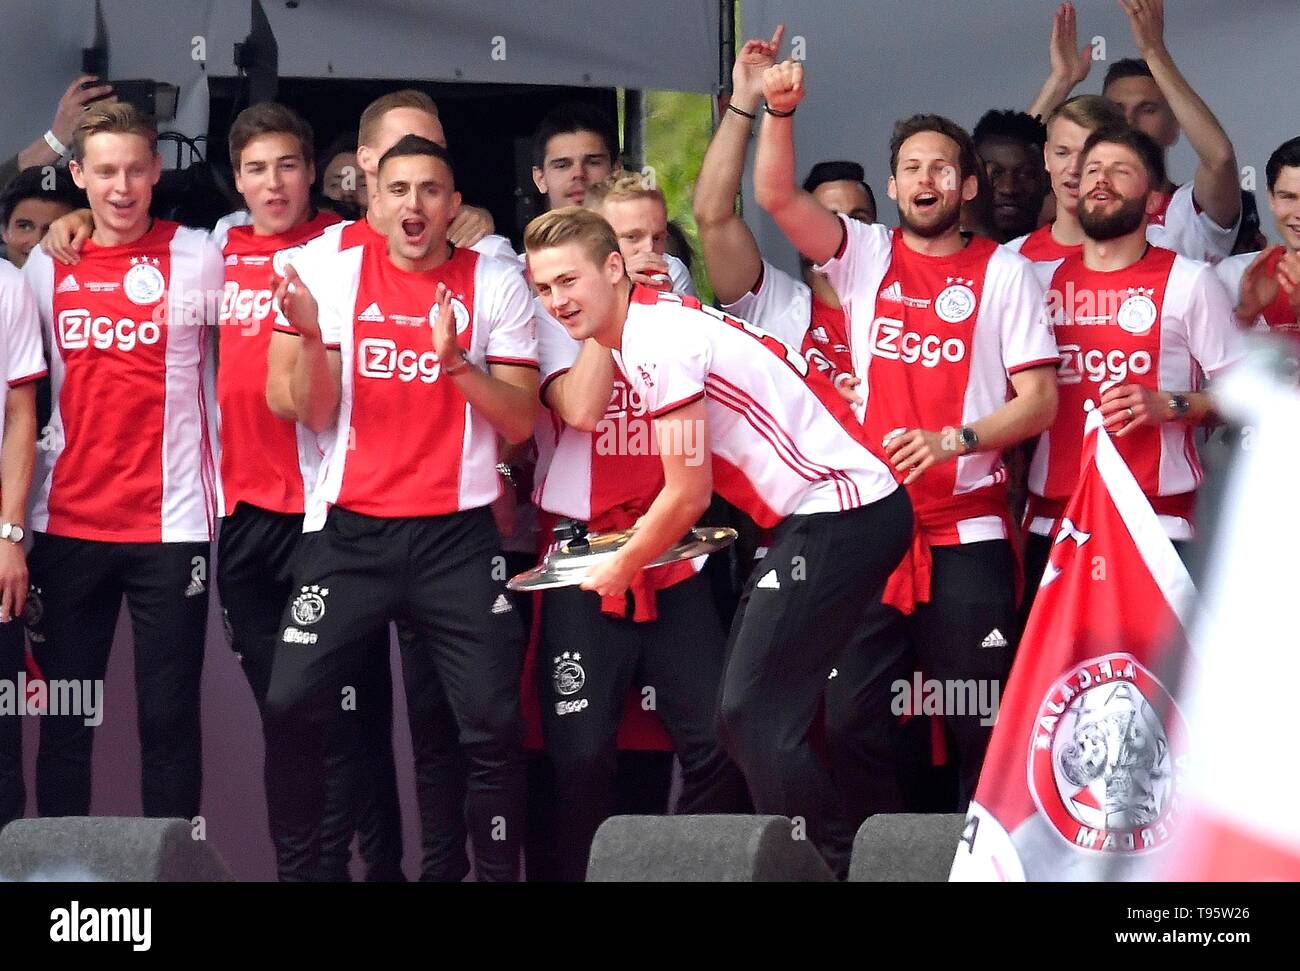 Matthijs de Ligt (Ajax) Football Dutch Premier Division 2018/2019 Victory Ceremony Champion May 16, 2019 in Museum Square of Amsterdam, The Netherlands Credit: Sander Chamid/SCS/AFLO/Alamy Live News Stock Photo